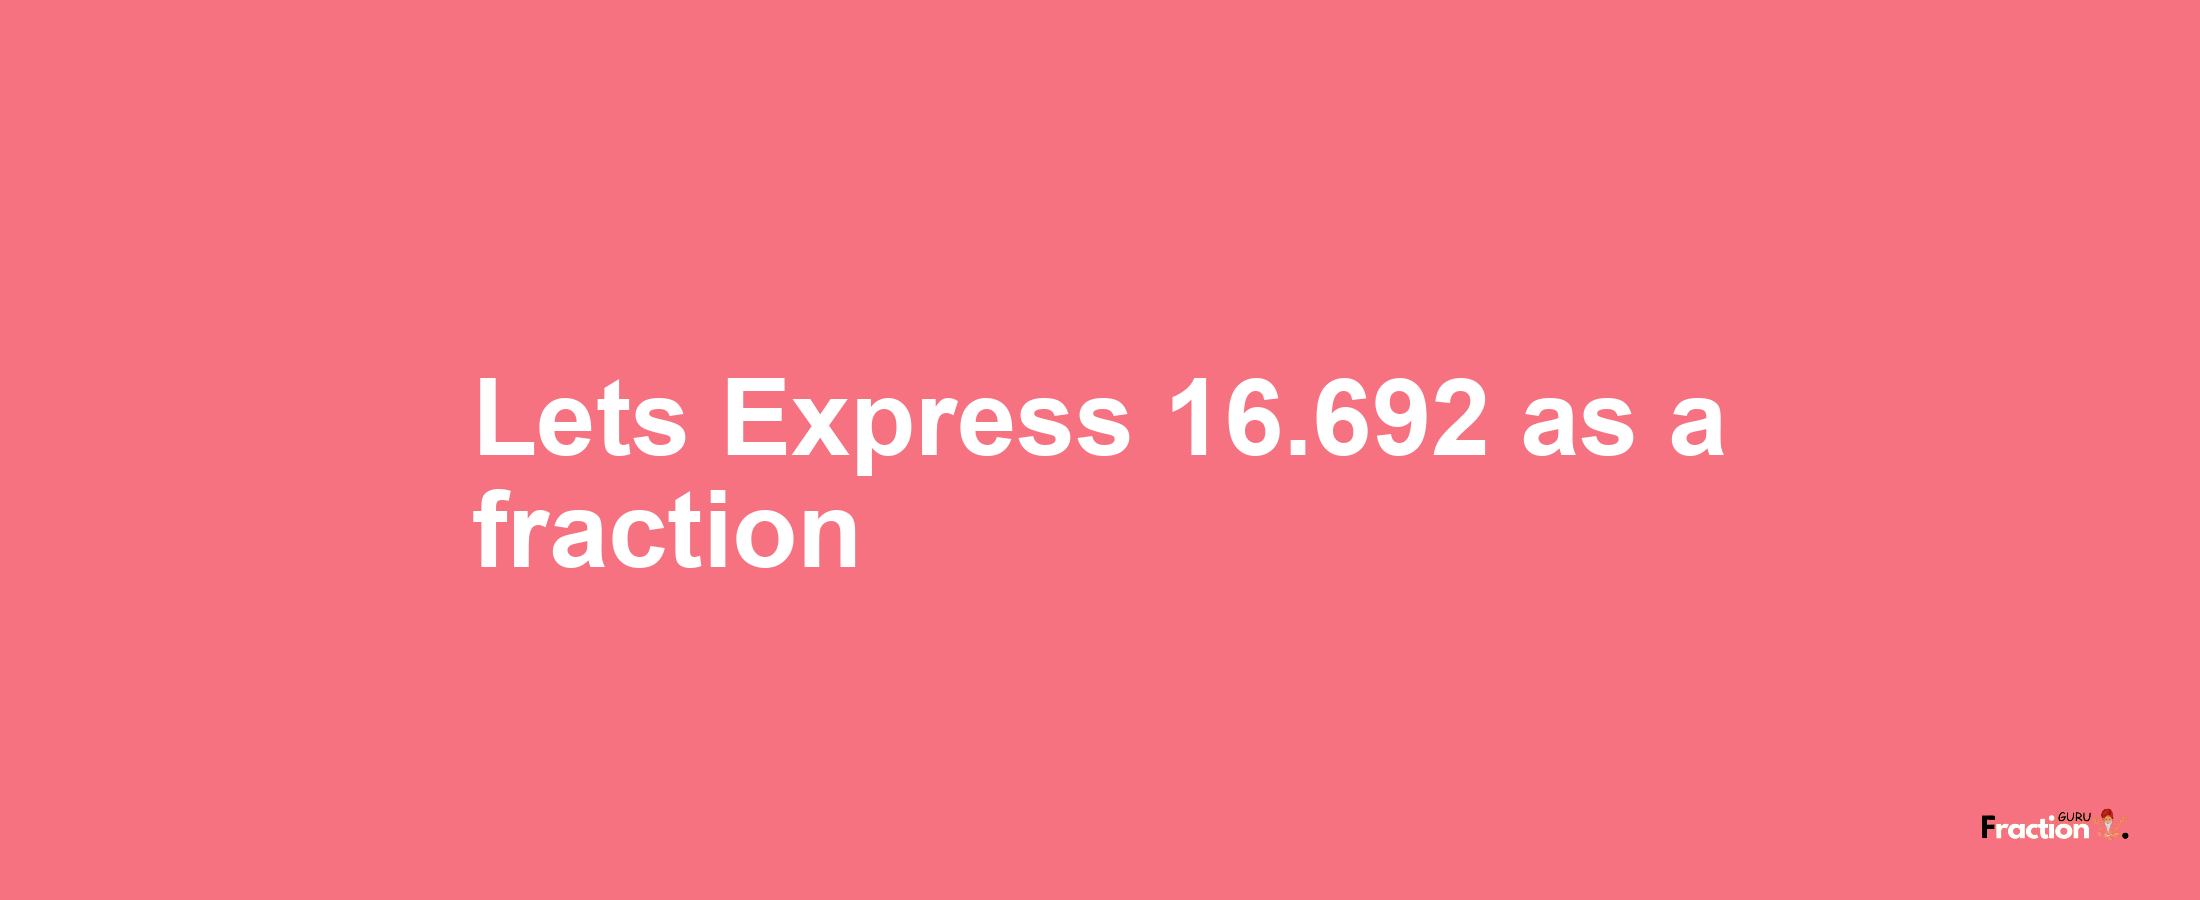 Lets Express 16.692 as afraction